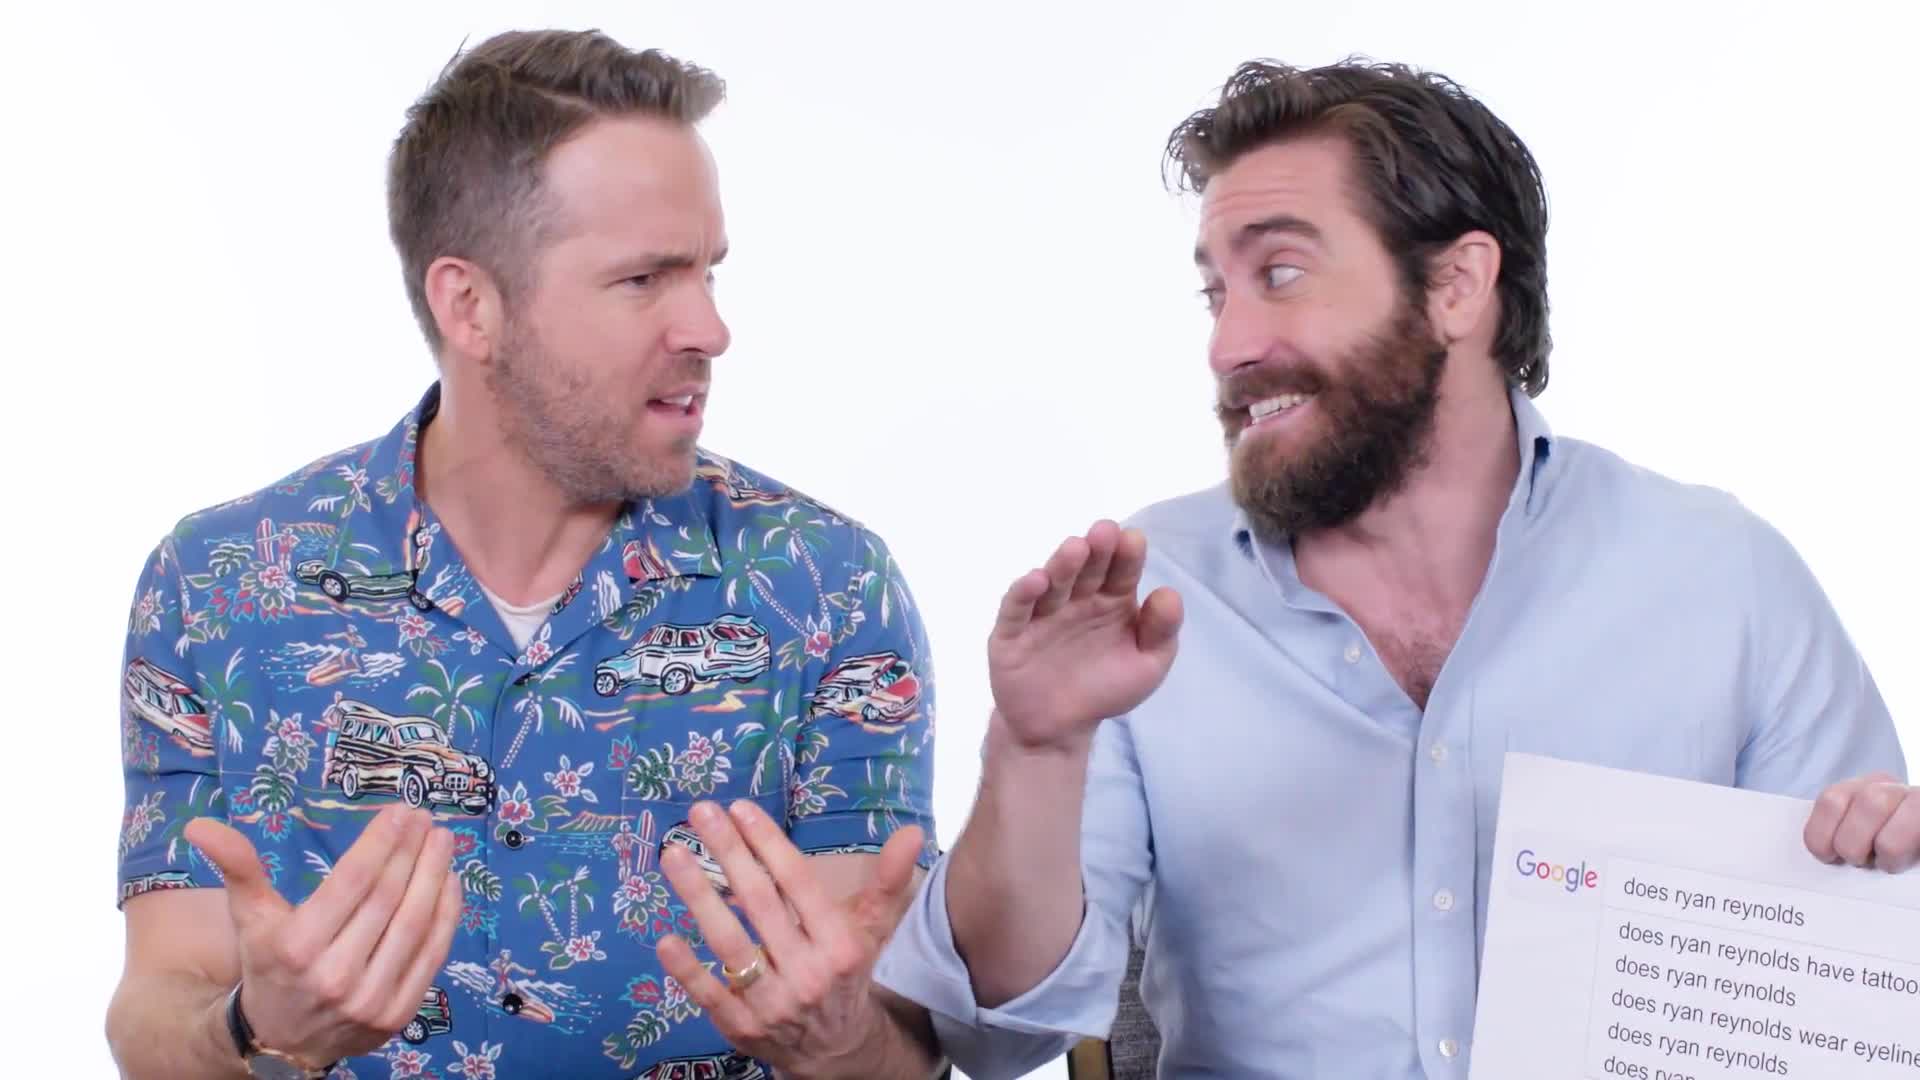 Watch Ryan Reynolds and Jake Gyllenhaal Answer the Webs Most Searched Questions Autocomplete Interview WIRED picture pic